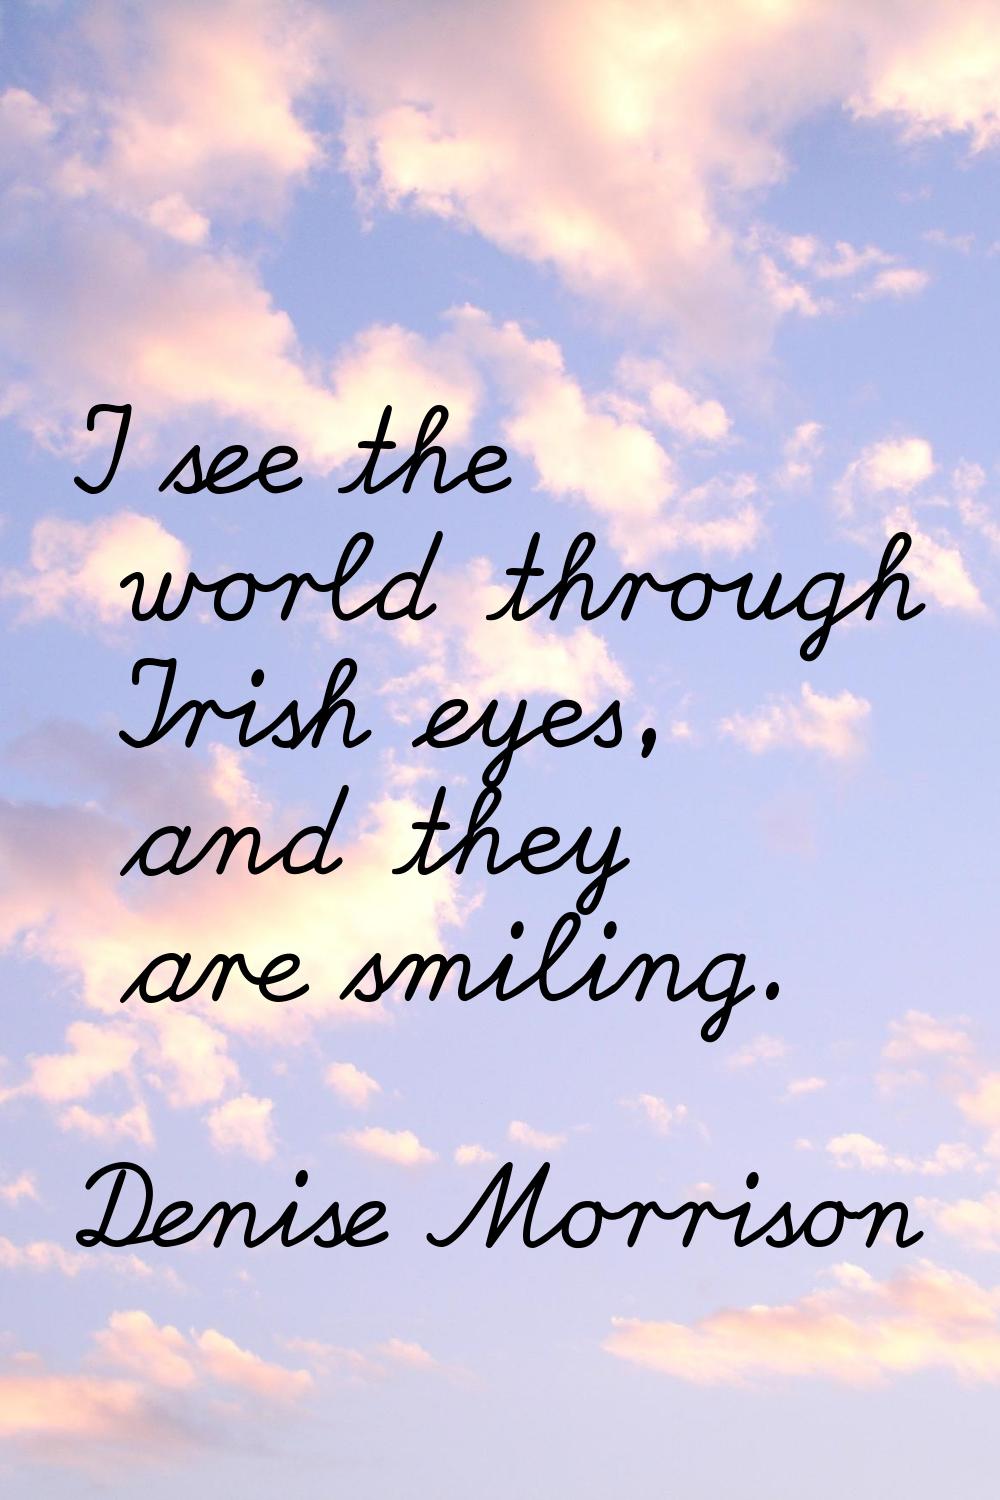 I see the world through Irish eyes, and they are smiling.